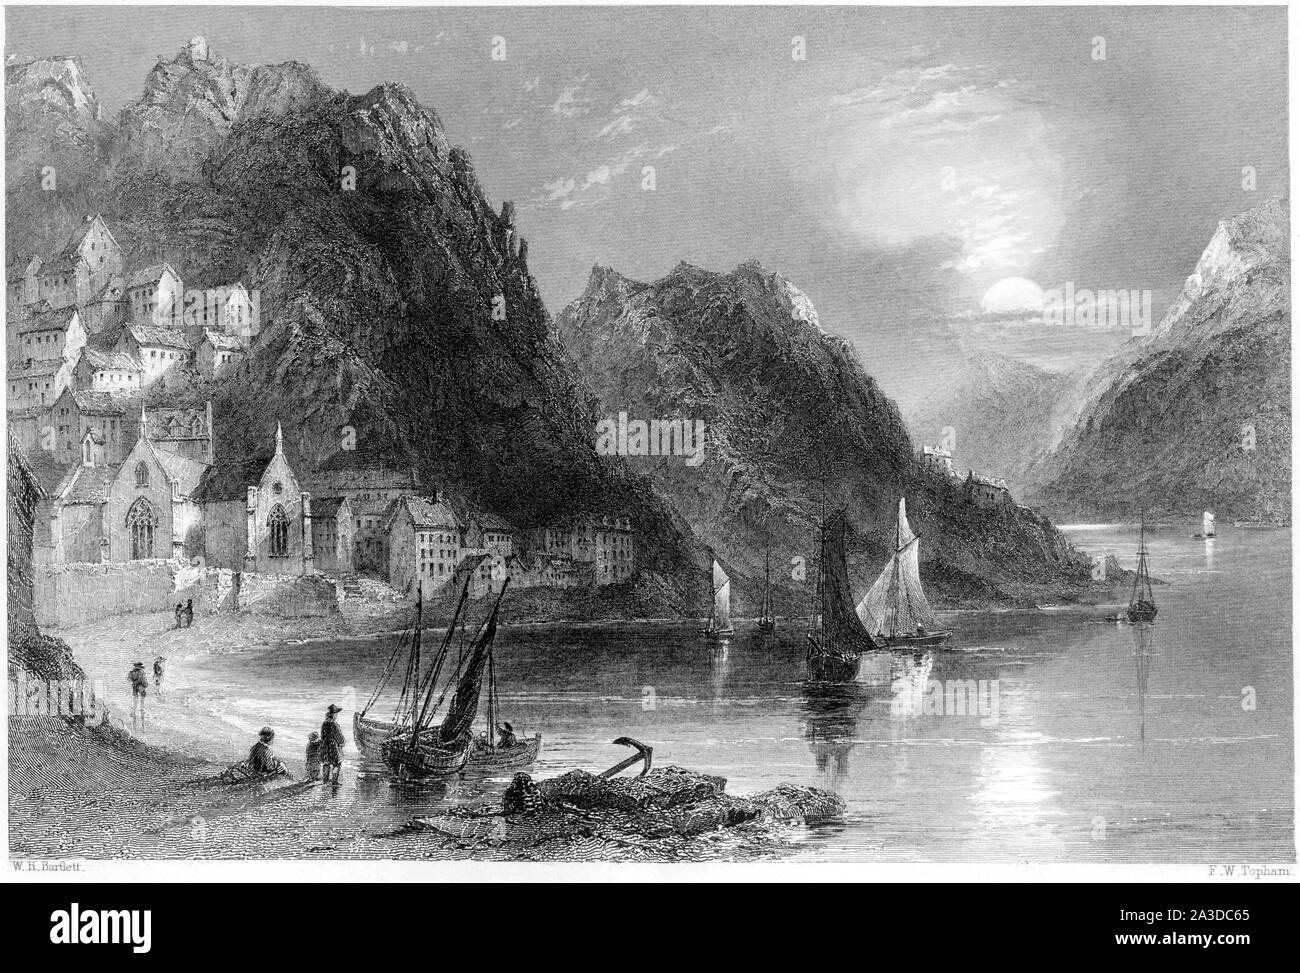 An engraving of Barmouth scanned at high resolution from a book printed in 1842.  Believed copyright free. Stock Photo